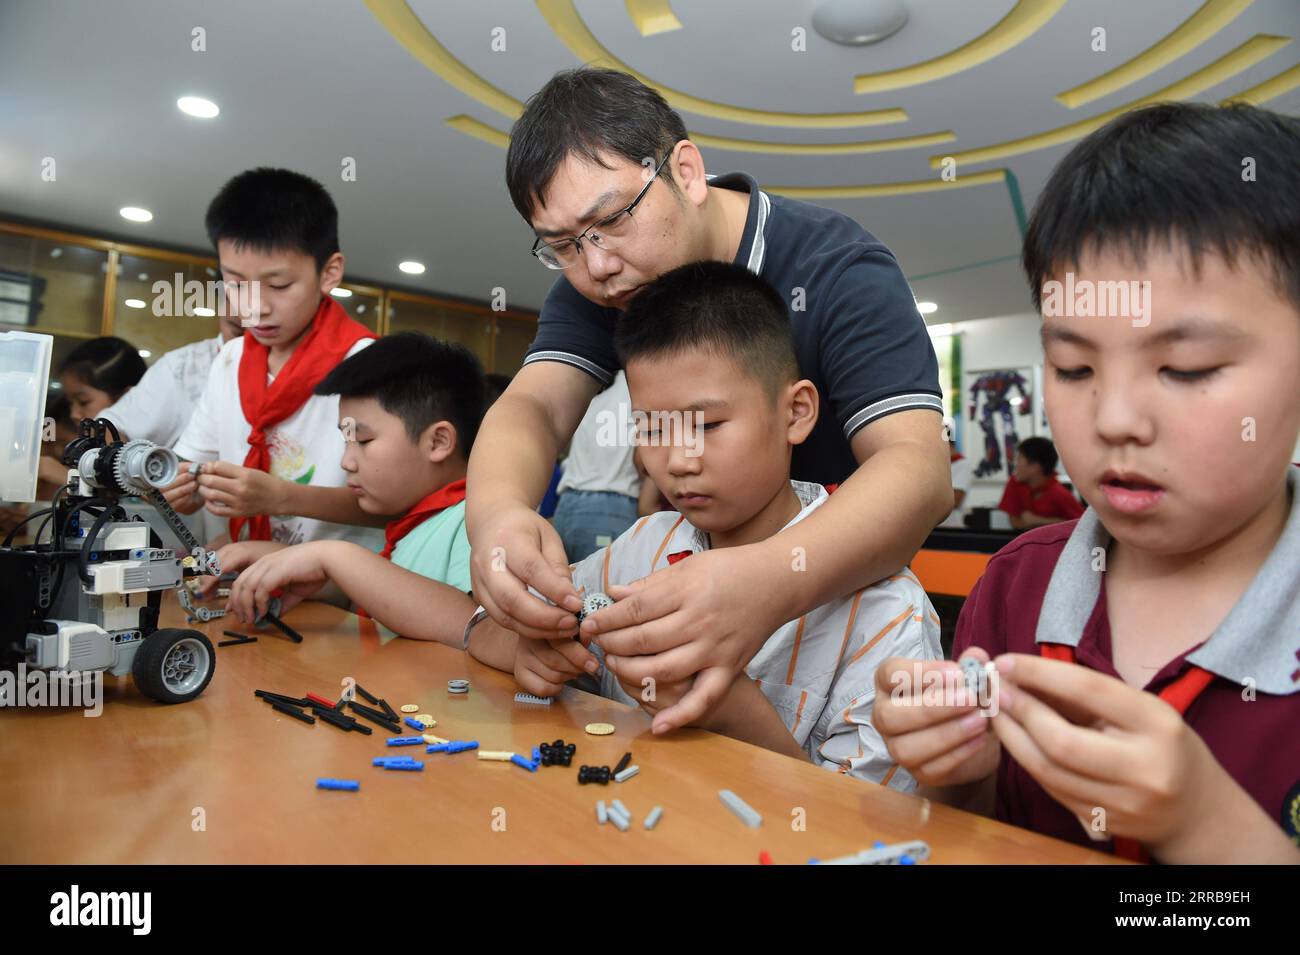 210909 -- HEFEI, Sept. 9, 2021 -- Yang Sen instructs his students at the robot club at Heping Primary School in Hefei City, east China s Anhui Province, Sept. 8, 2021. Yang Sen, a computer teacher from Heping Primary School, has interest in graphical language applied to robots in his spare time. After class, he organizes a robot club instructing his students to explore the use of multiple sensors and various scientific principles.  CHINA-ANHUI-HEFEI-AFTER-SCHOOL ACTIVITY CN ZhouxMu PUBLICATIONxNOTxINxCHN Stock Photo